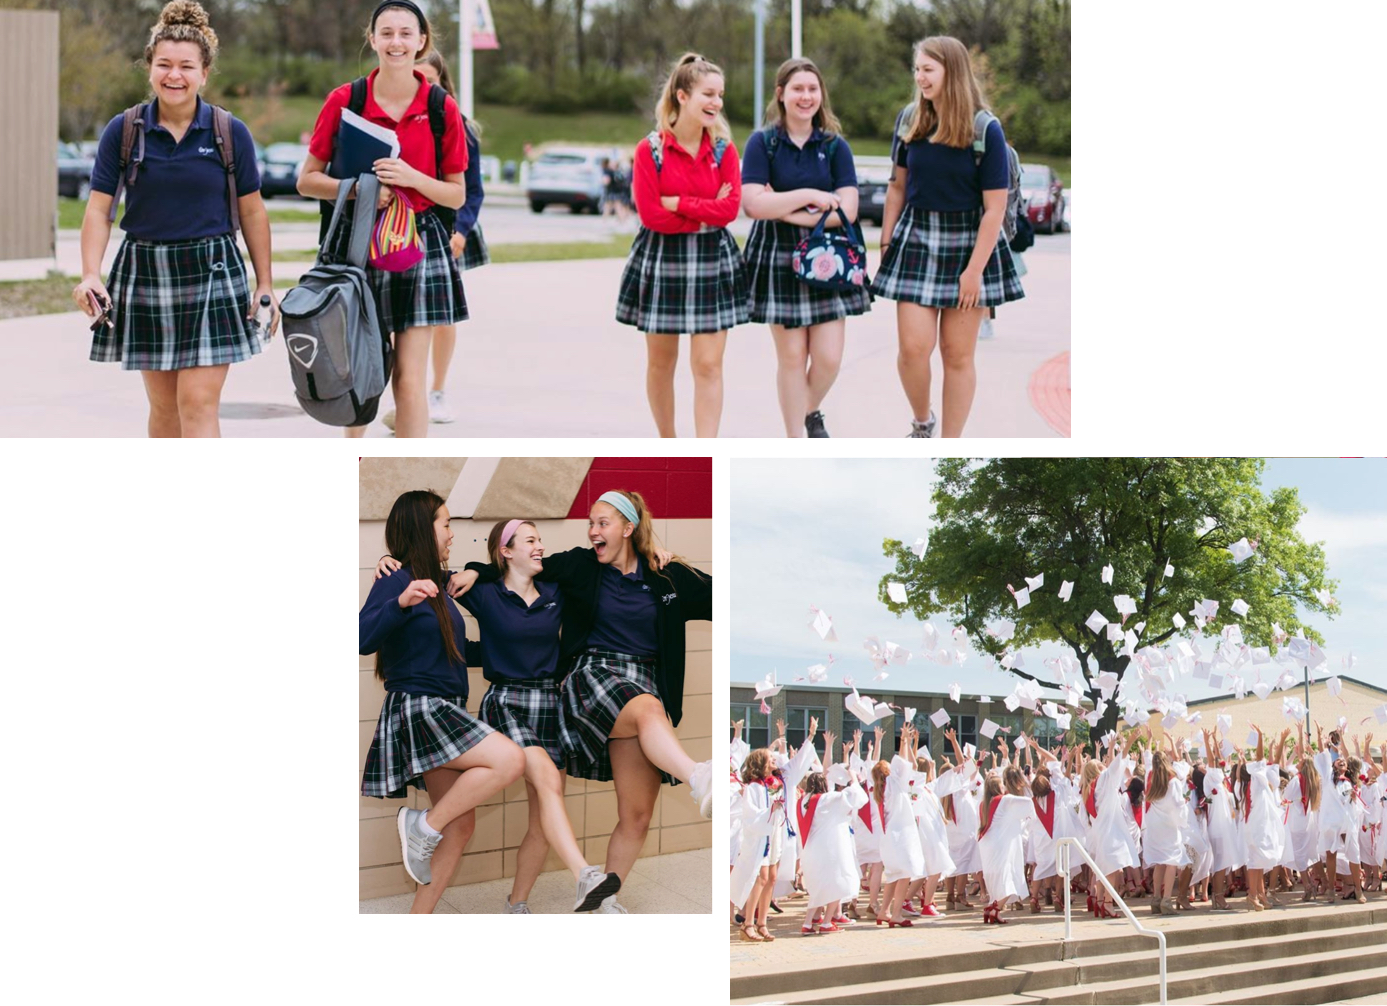 Candid photography served as inspiration for Cor Jesu's new branding